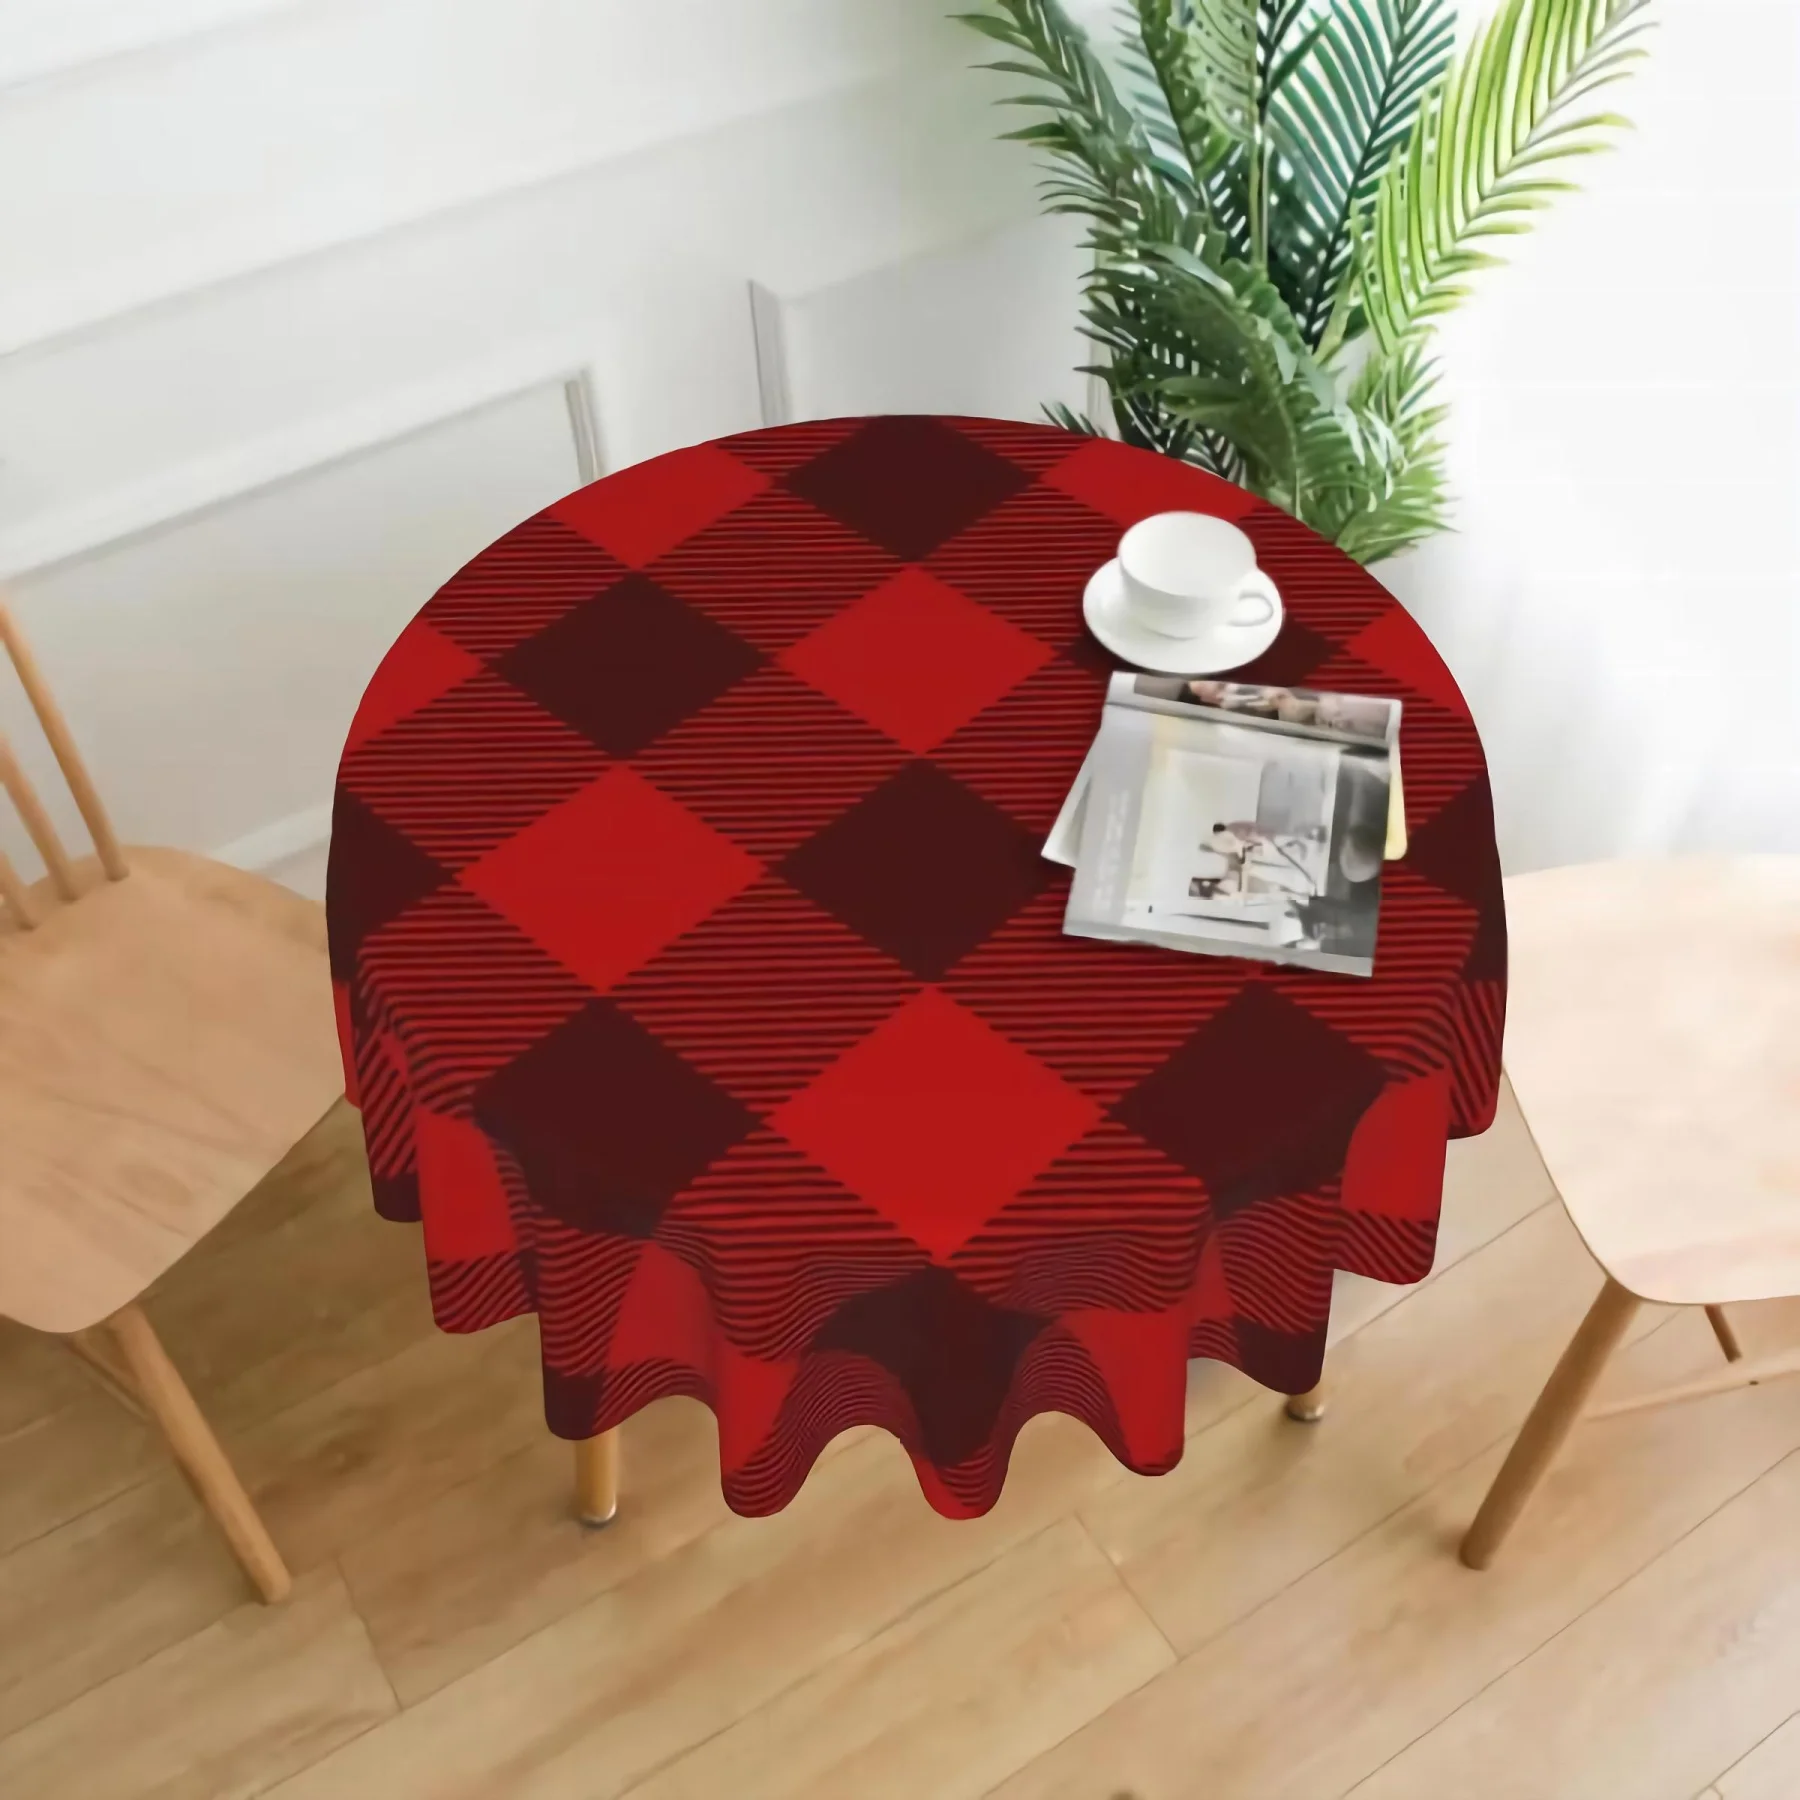 

Tartan Check Plaid Red Black Round Table Cloth Waterproof Resistant Wrinkle And Washable Table Cover 150 CM Diameter